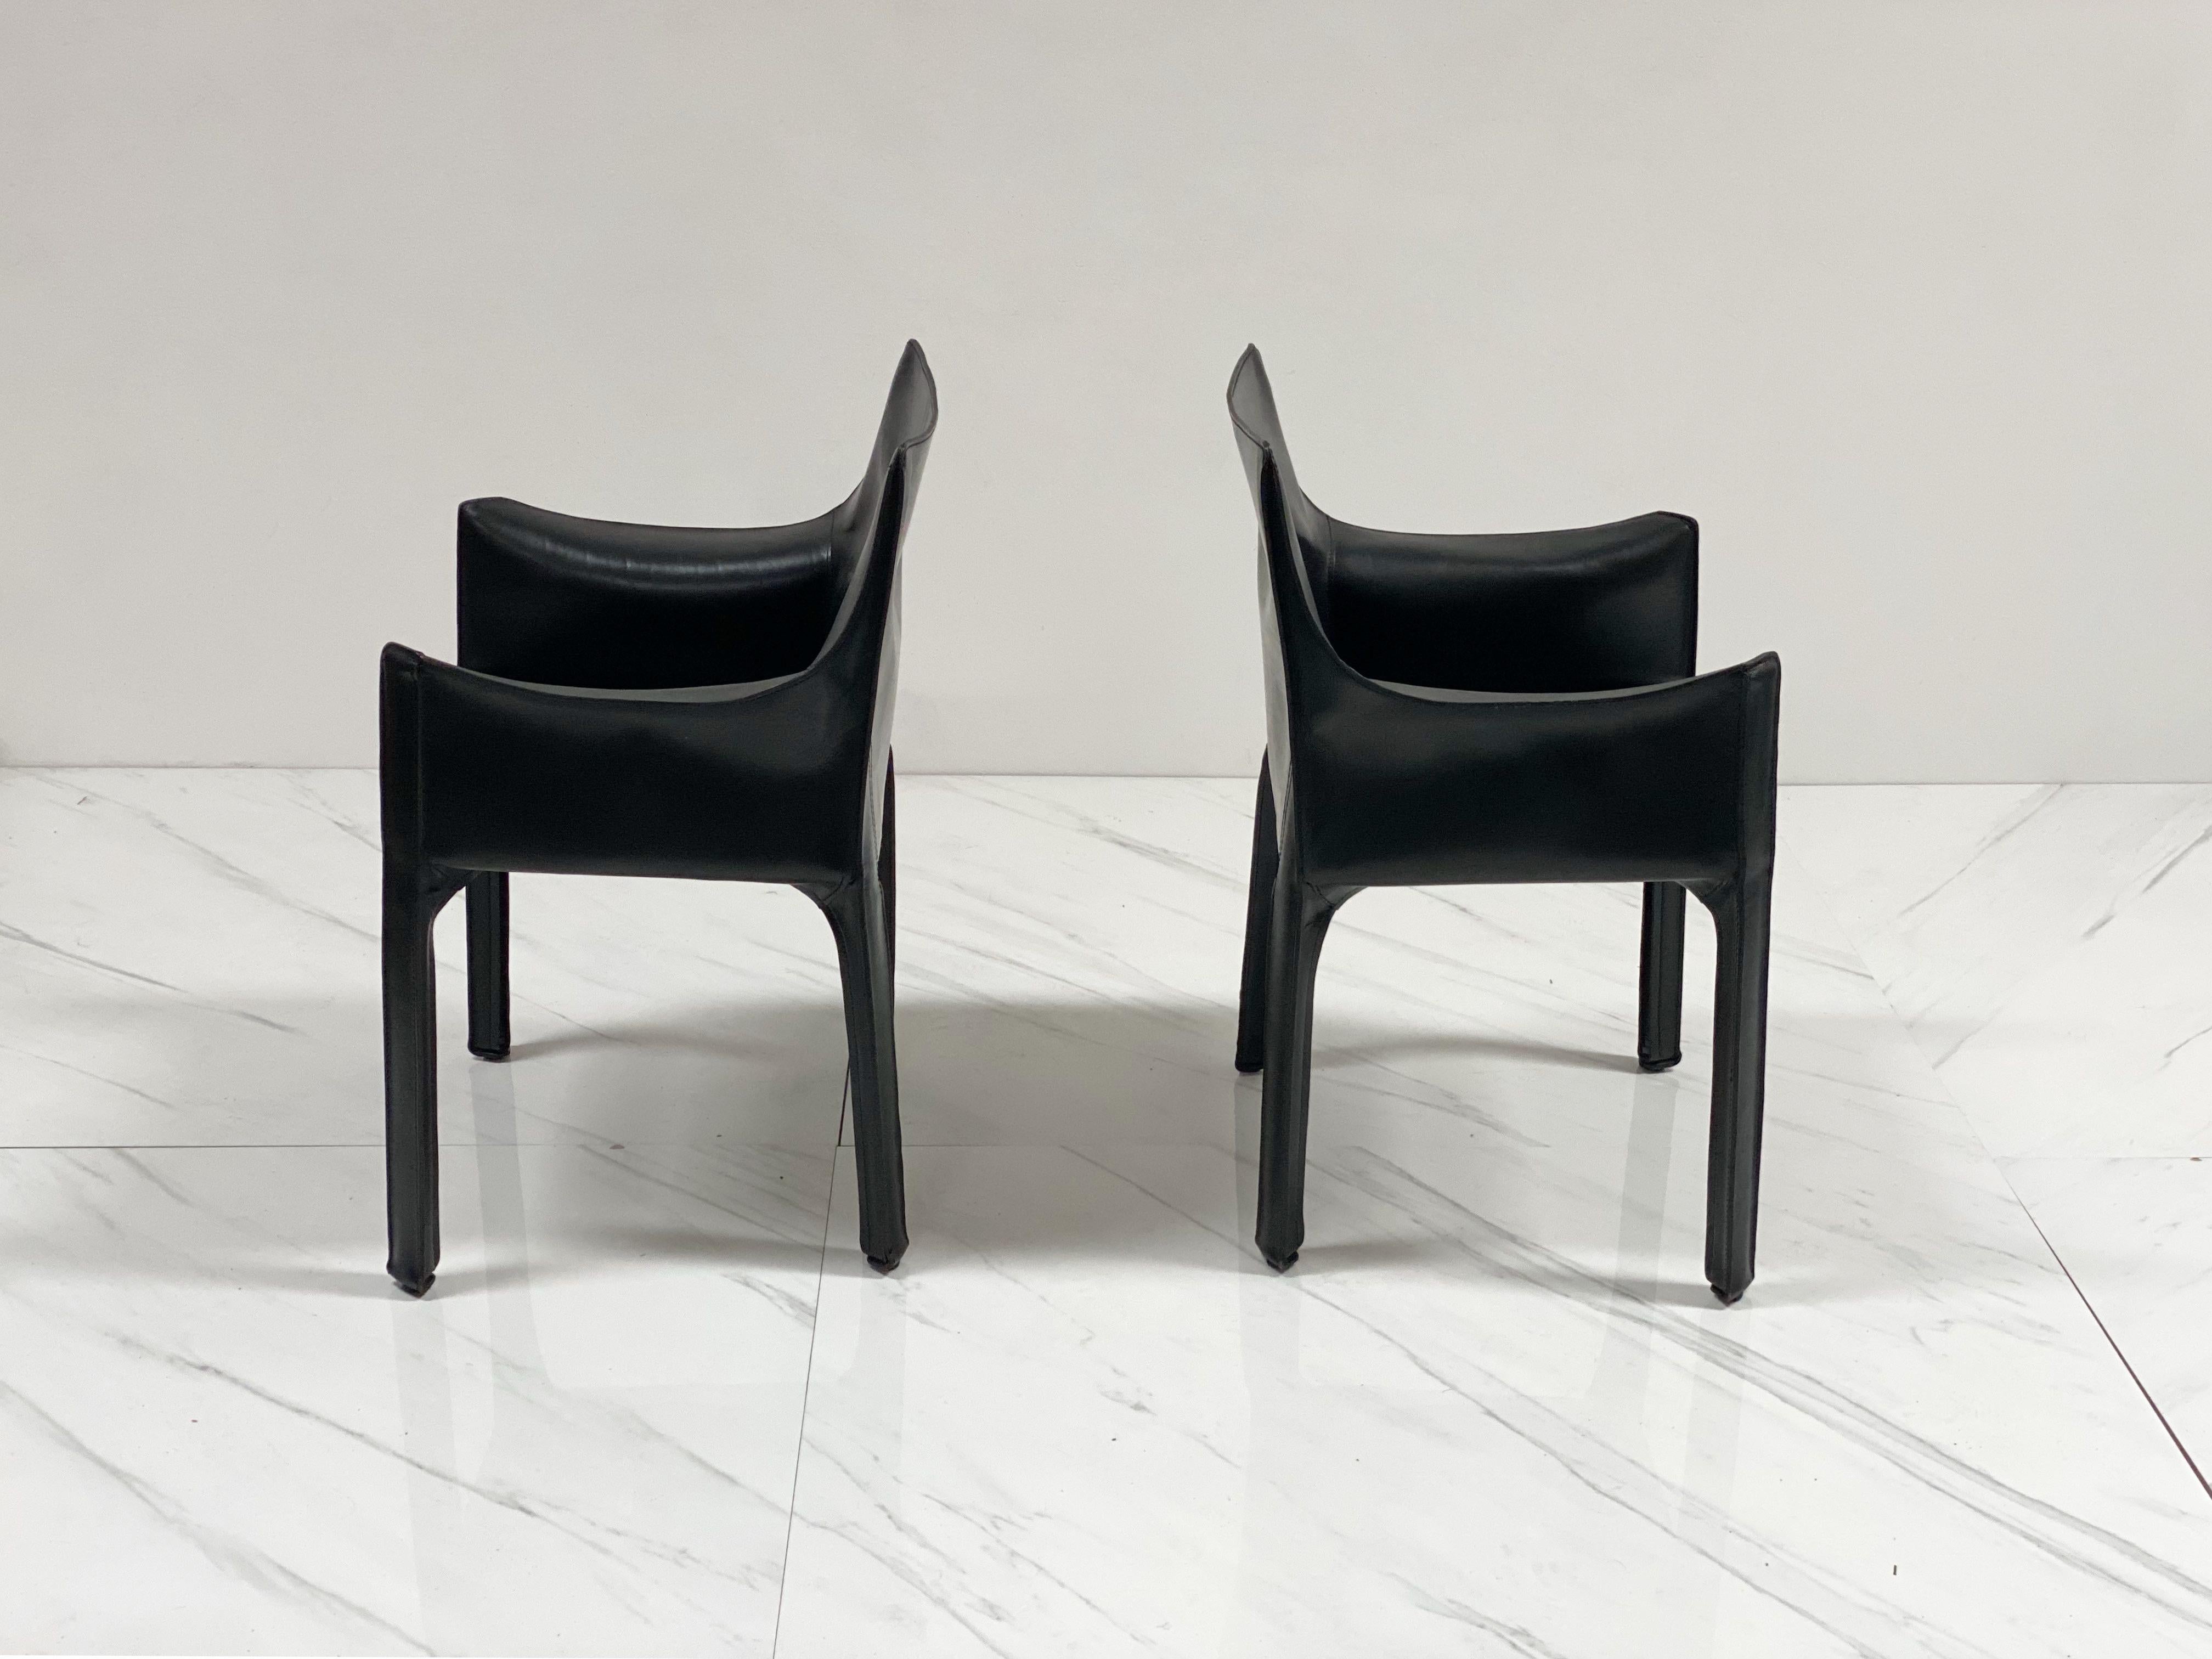 Early Production 'Cab' Armchairs by Mario Bellini for Cassina, c 1978, Signed 2